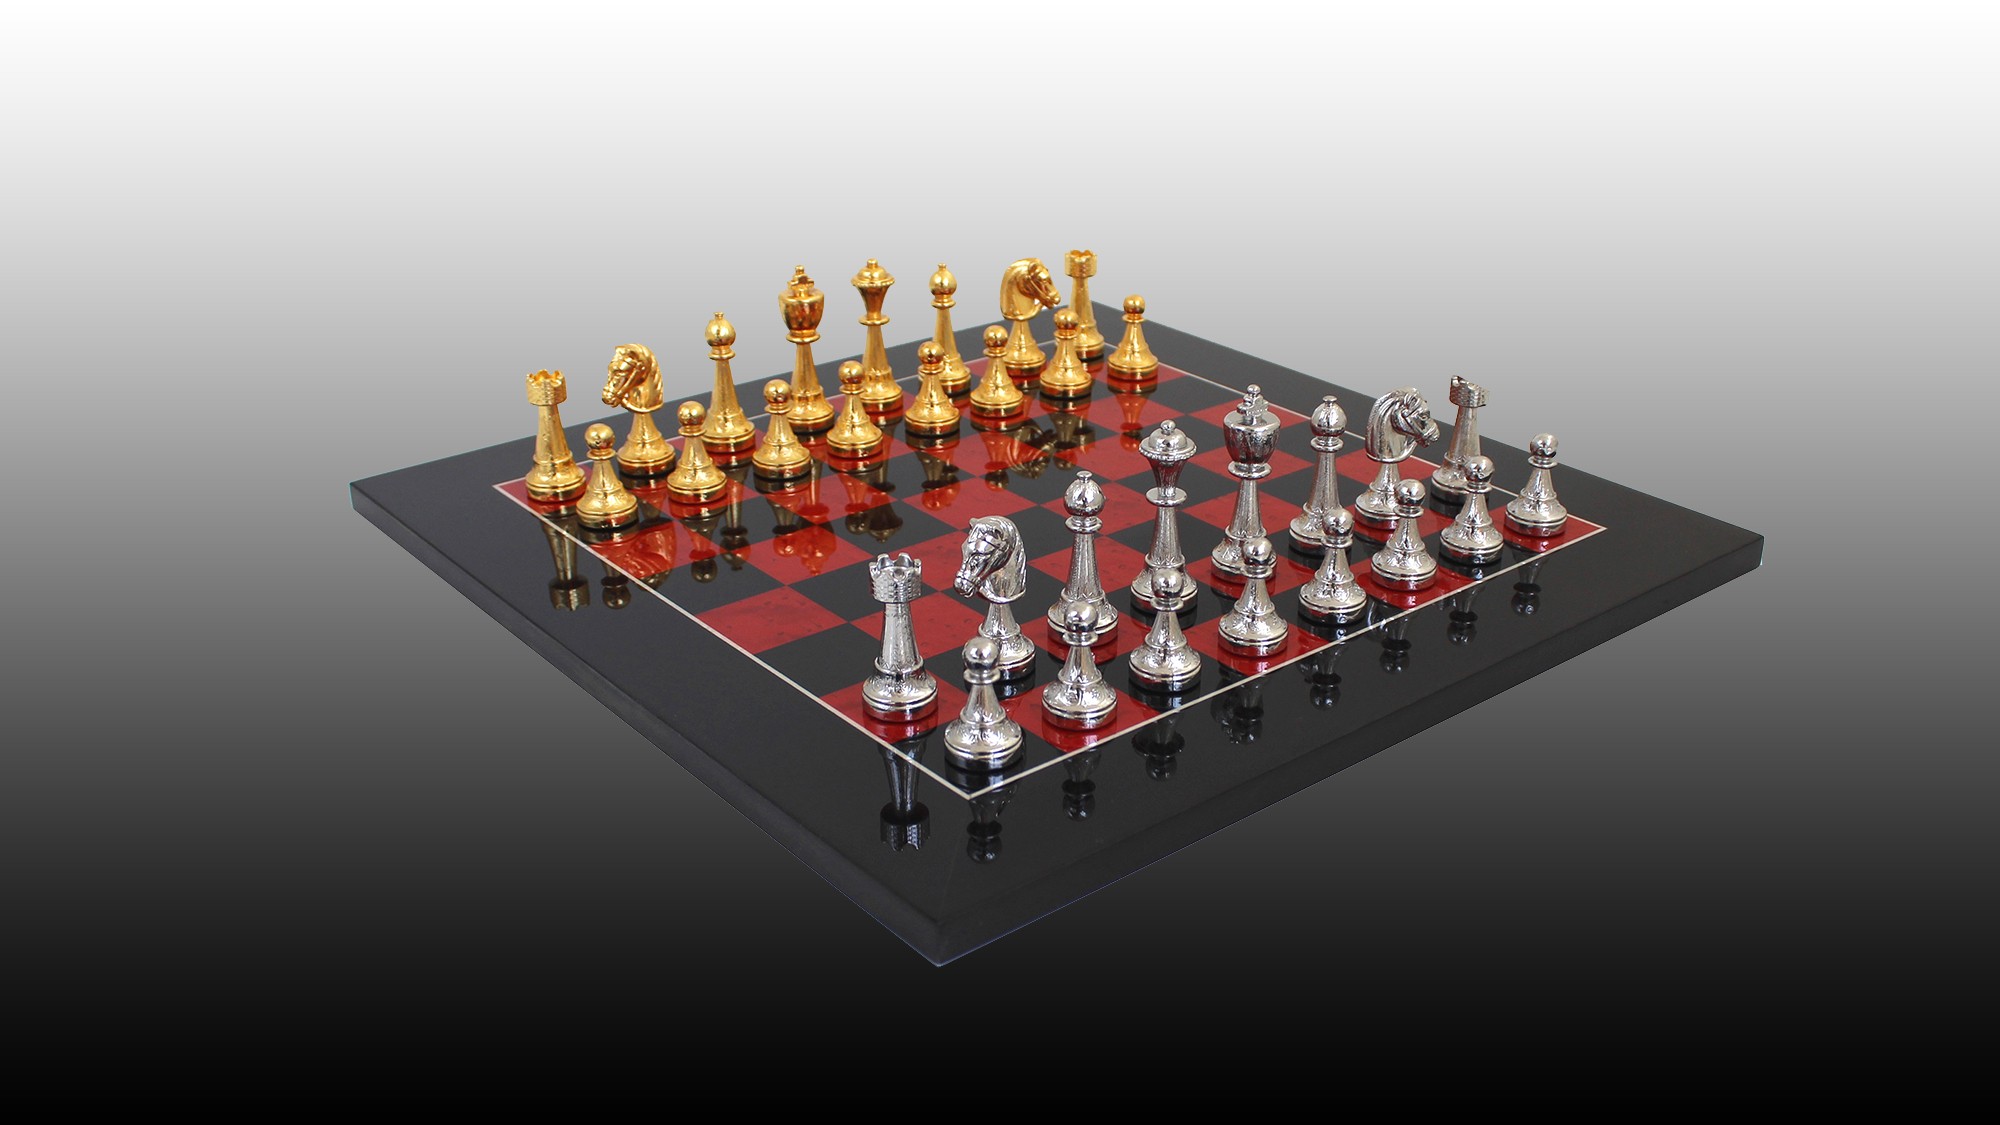 Italian Luxury Chess set from Italy game shop Florence opening online  Company Production Italian chess board hand carved pieces